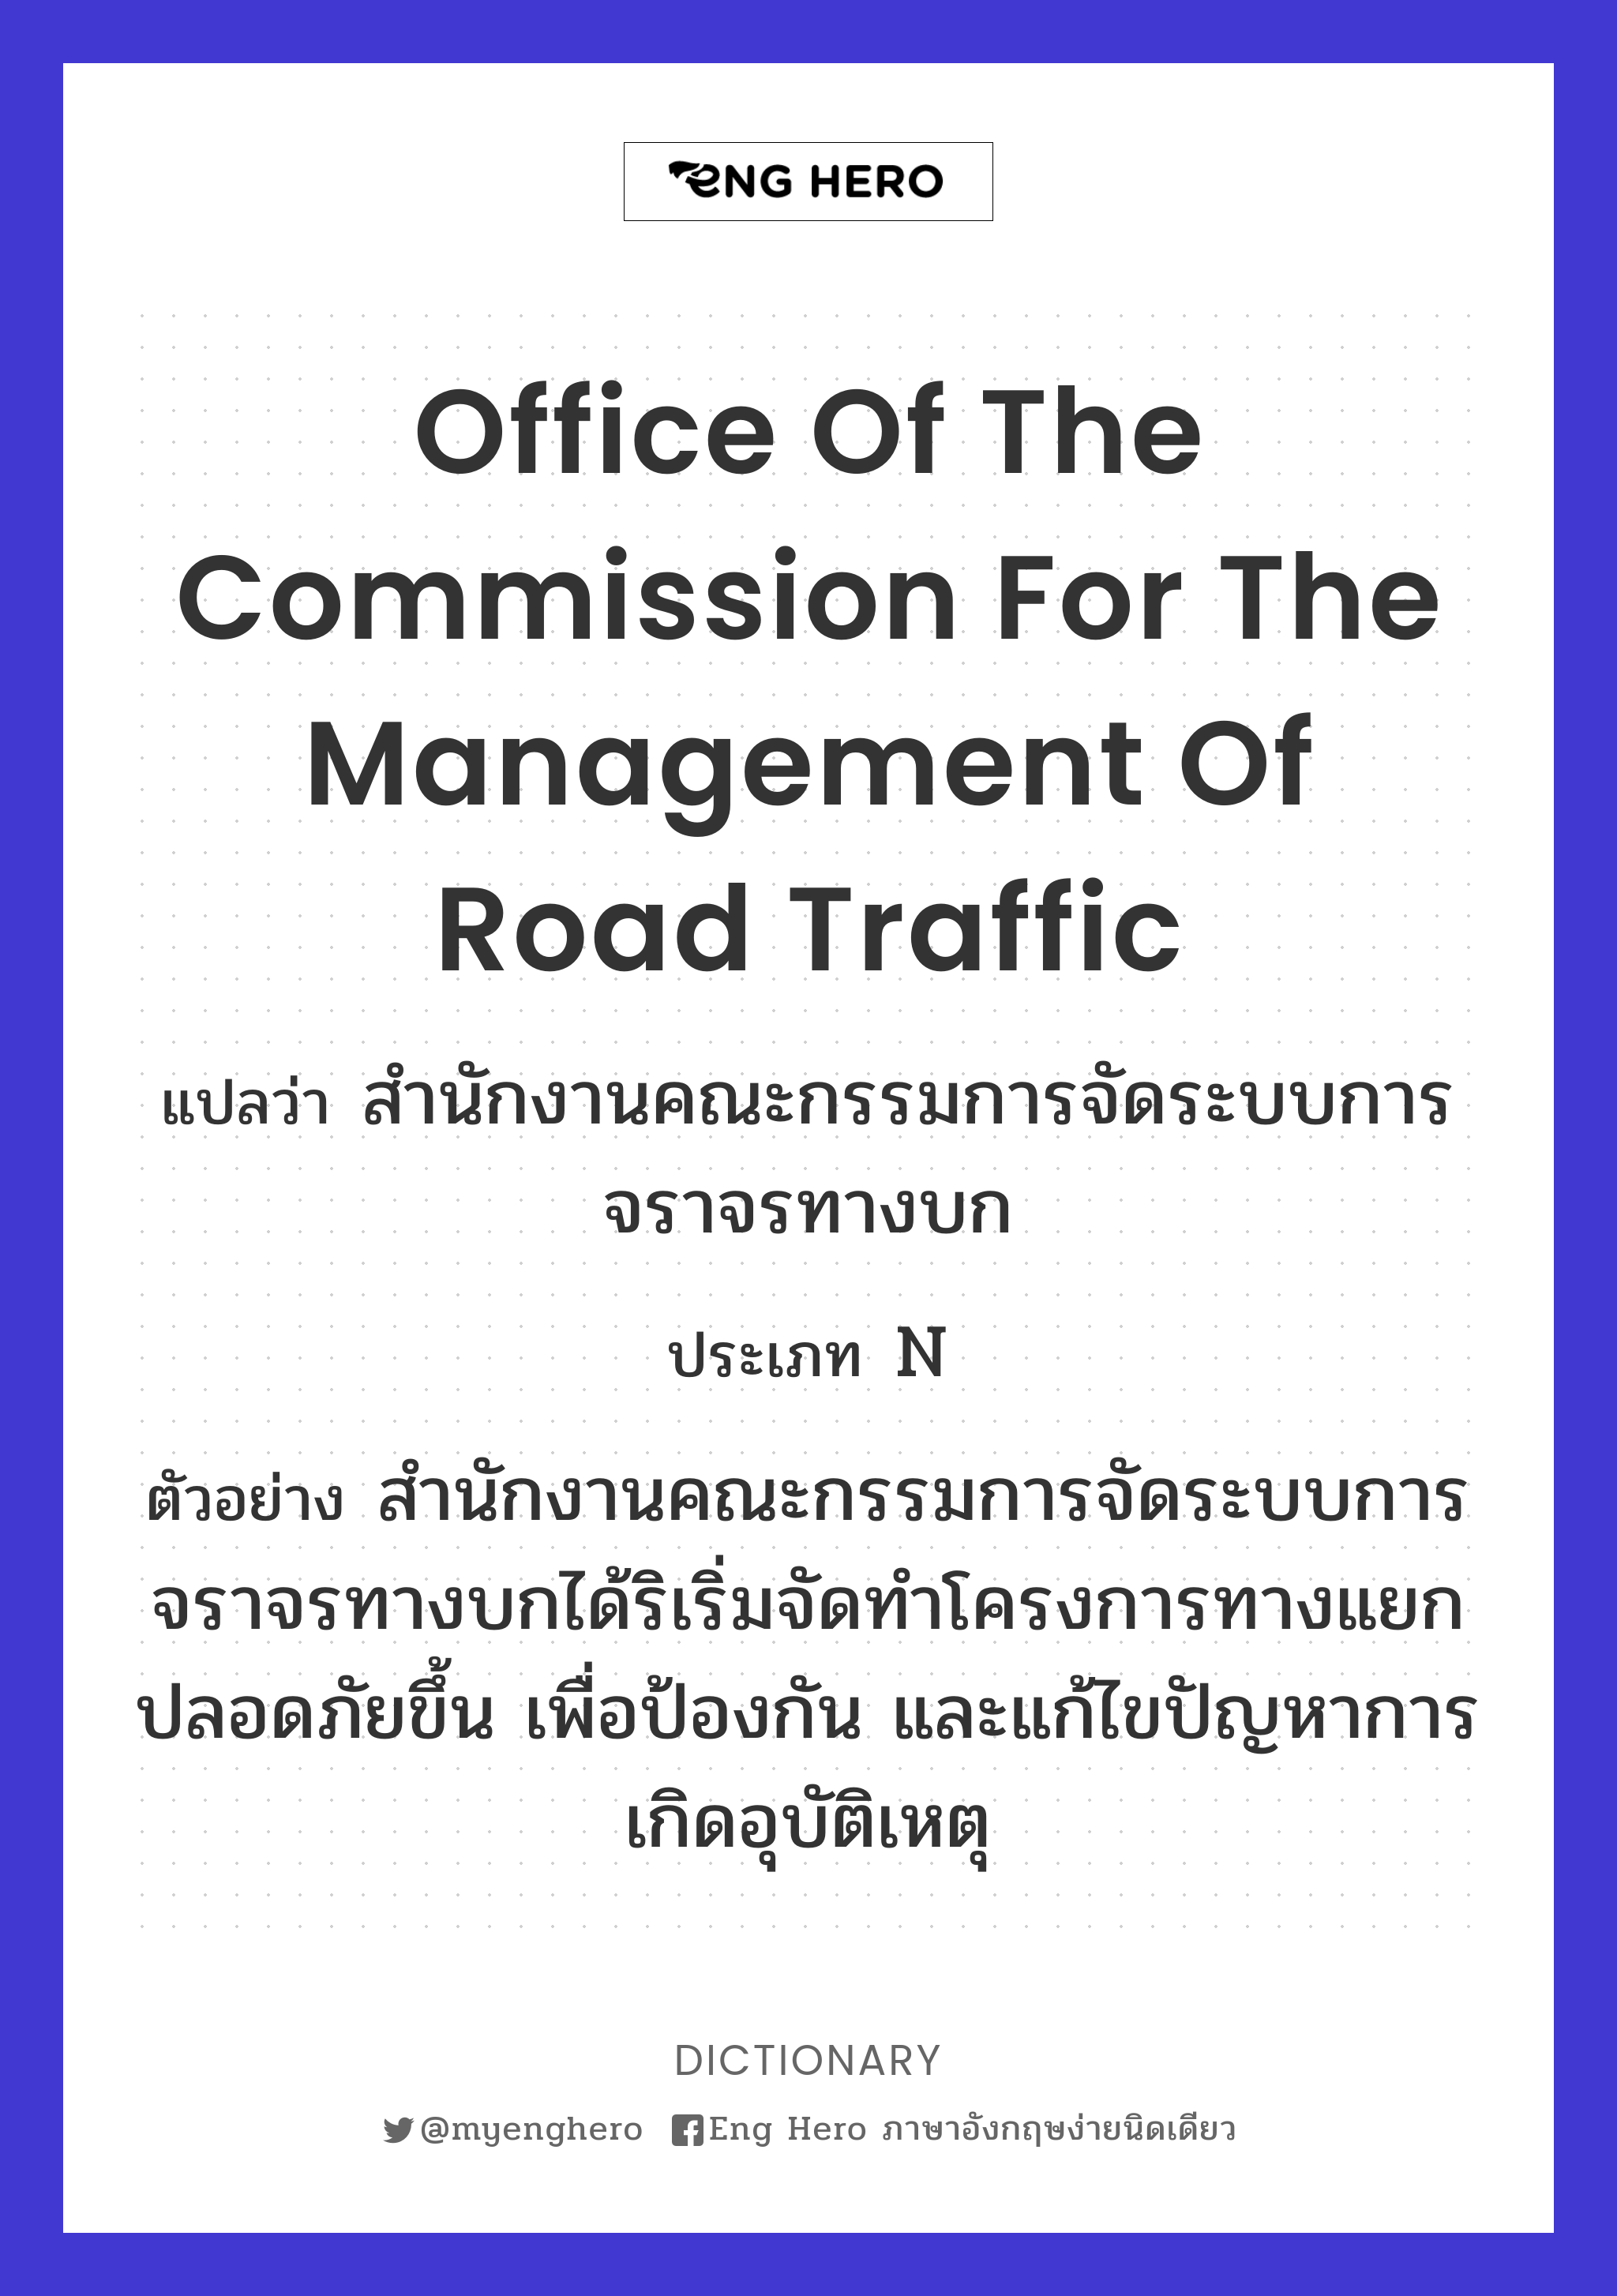 Office of the Commission for the Management of Road Traffic